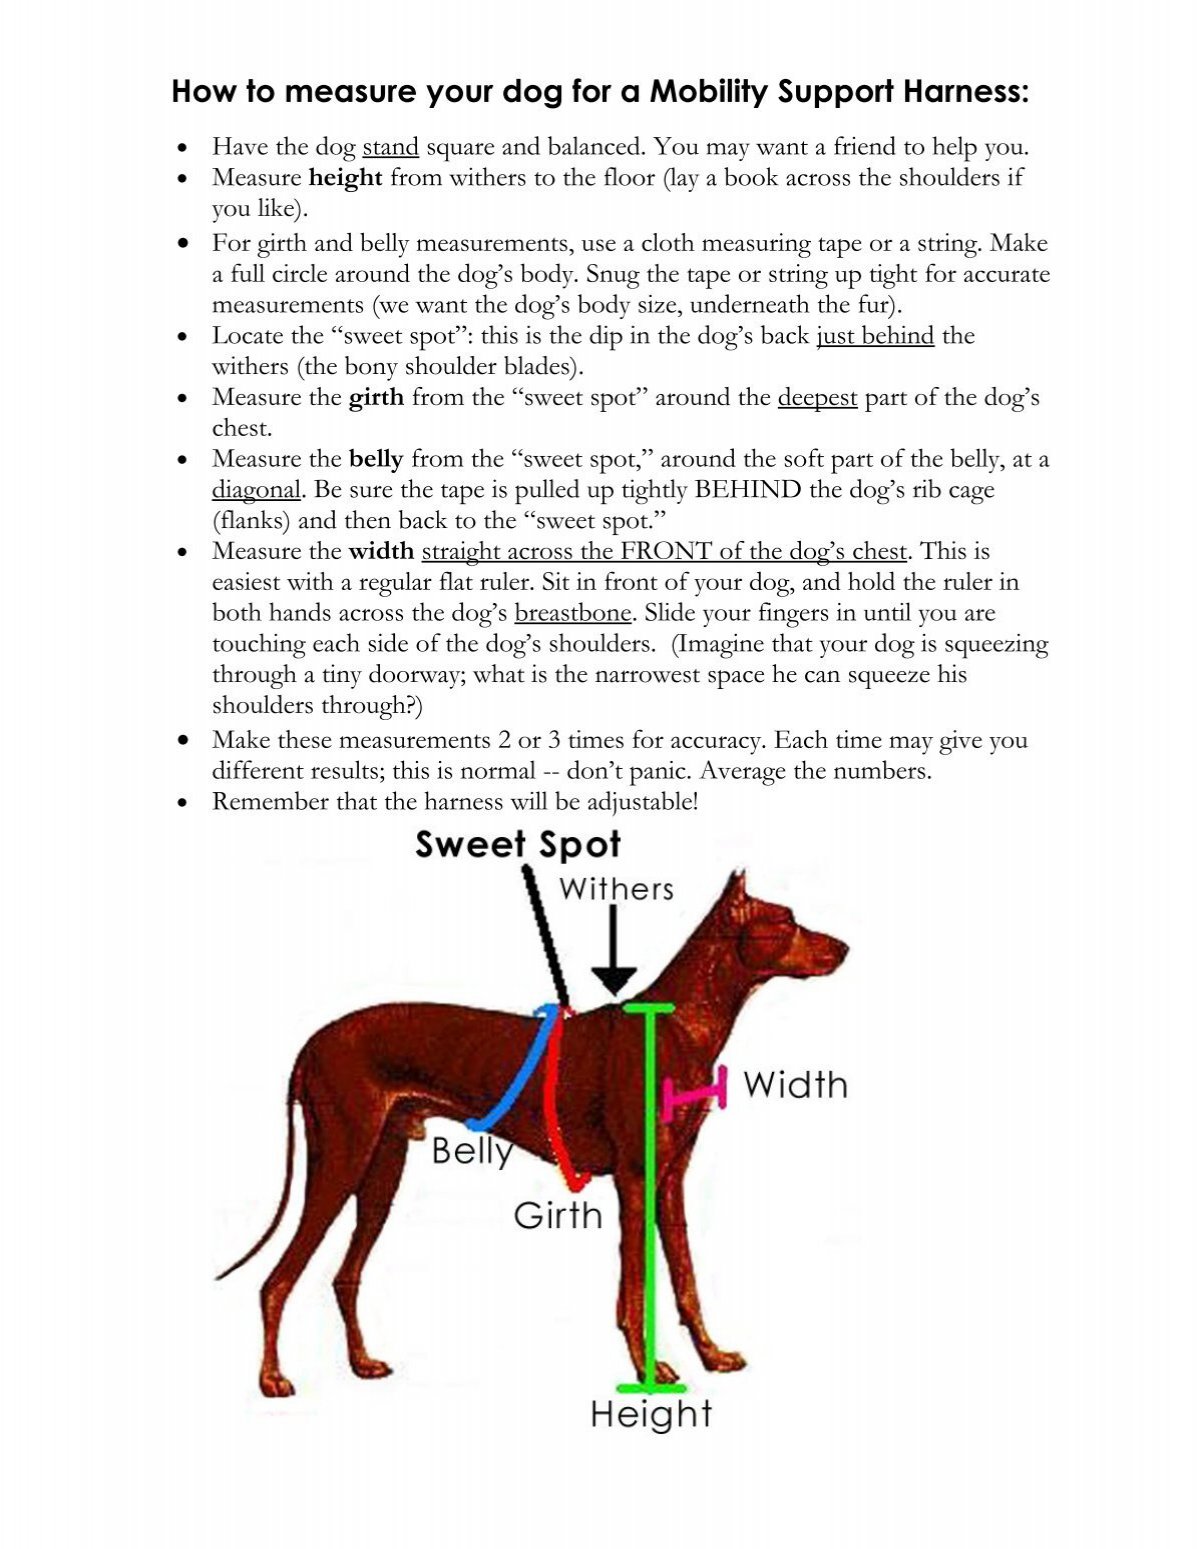 How to measure a dog's height